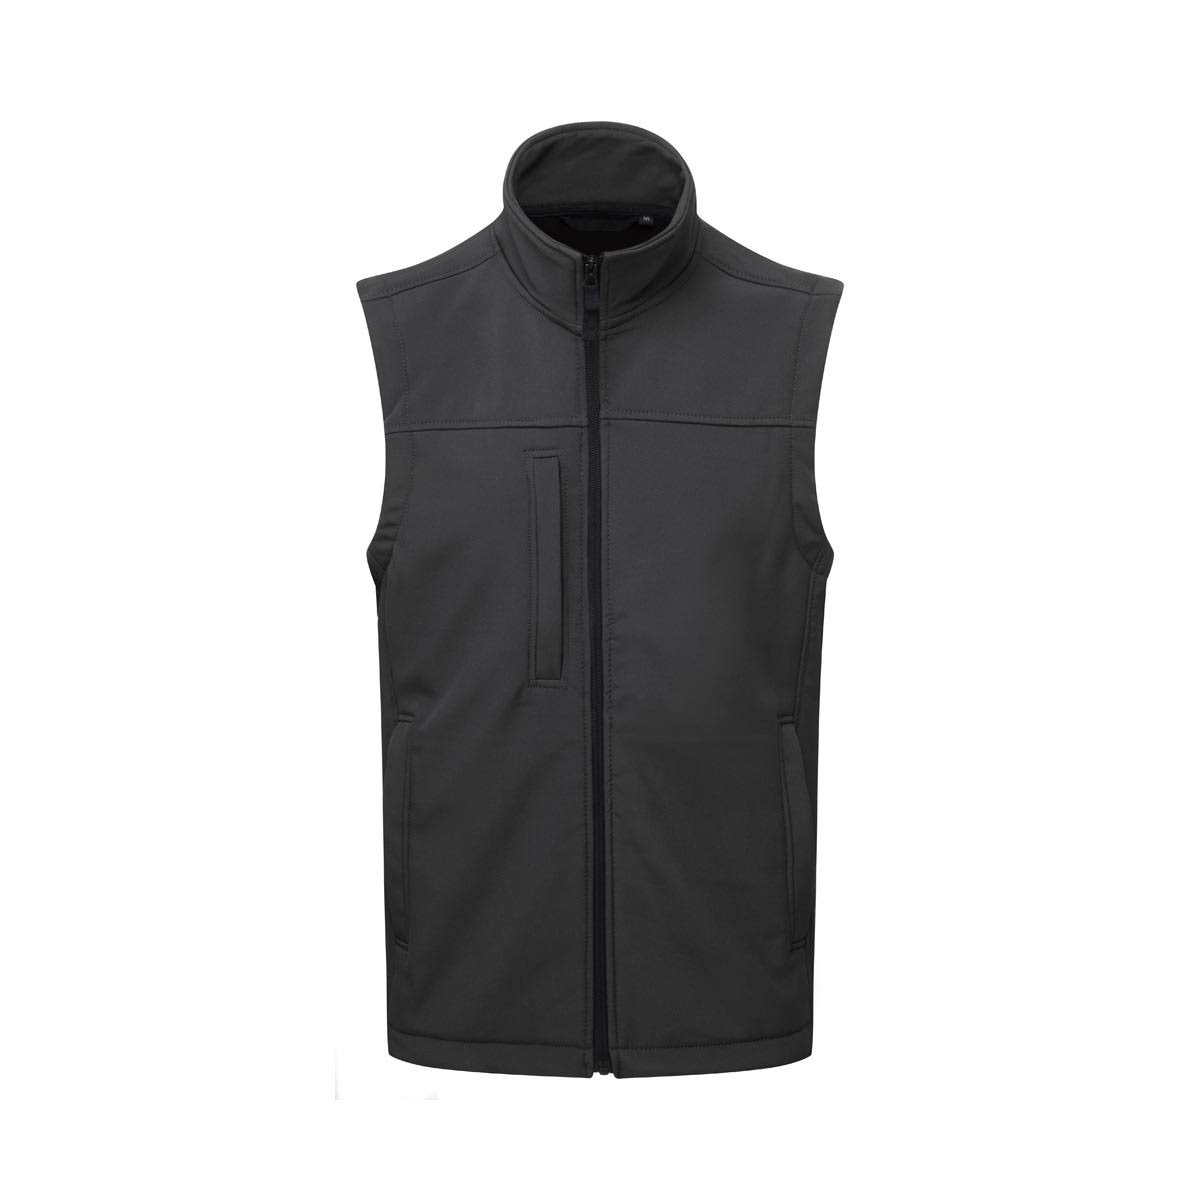 Fort 282-GRY-L 282 Breckland Bodywarmer Grey - L | By Toolden